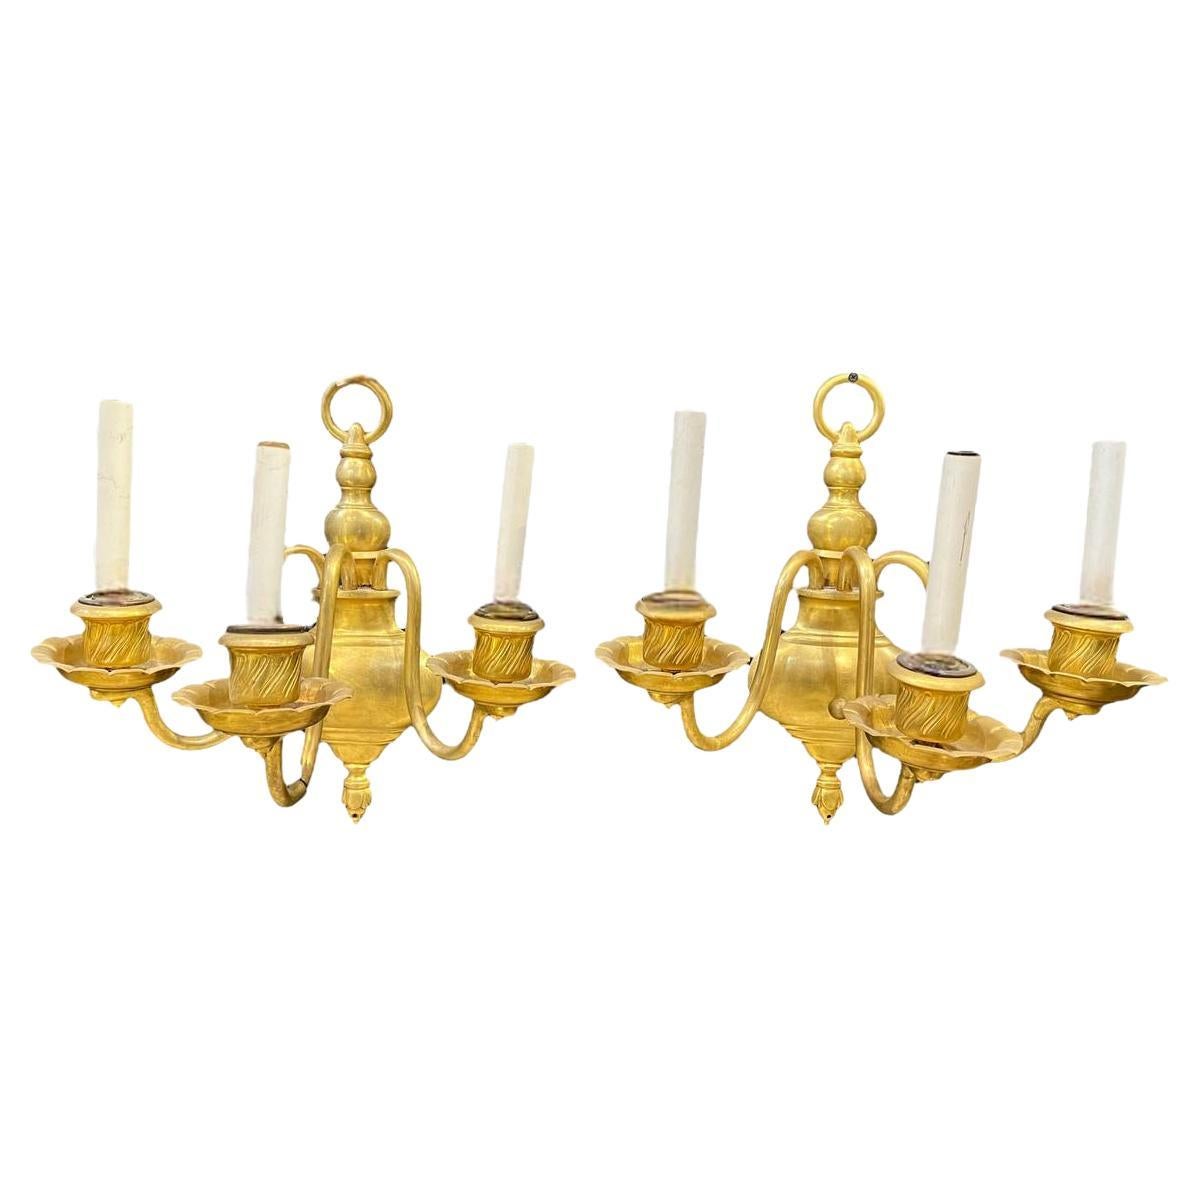 1920's Caldwell Sconces with Three Lights